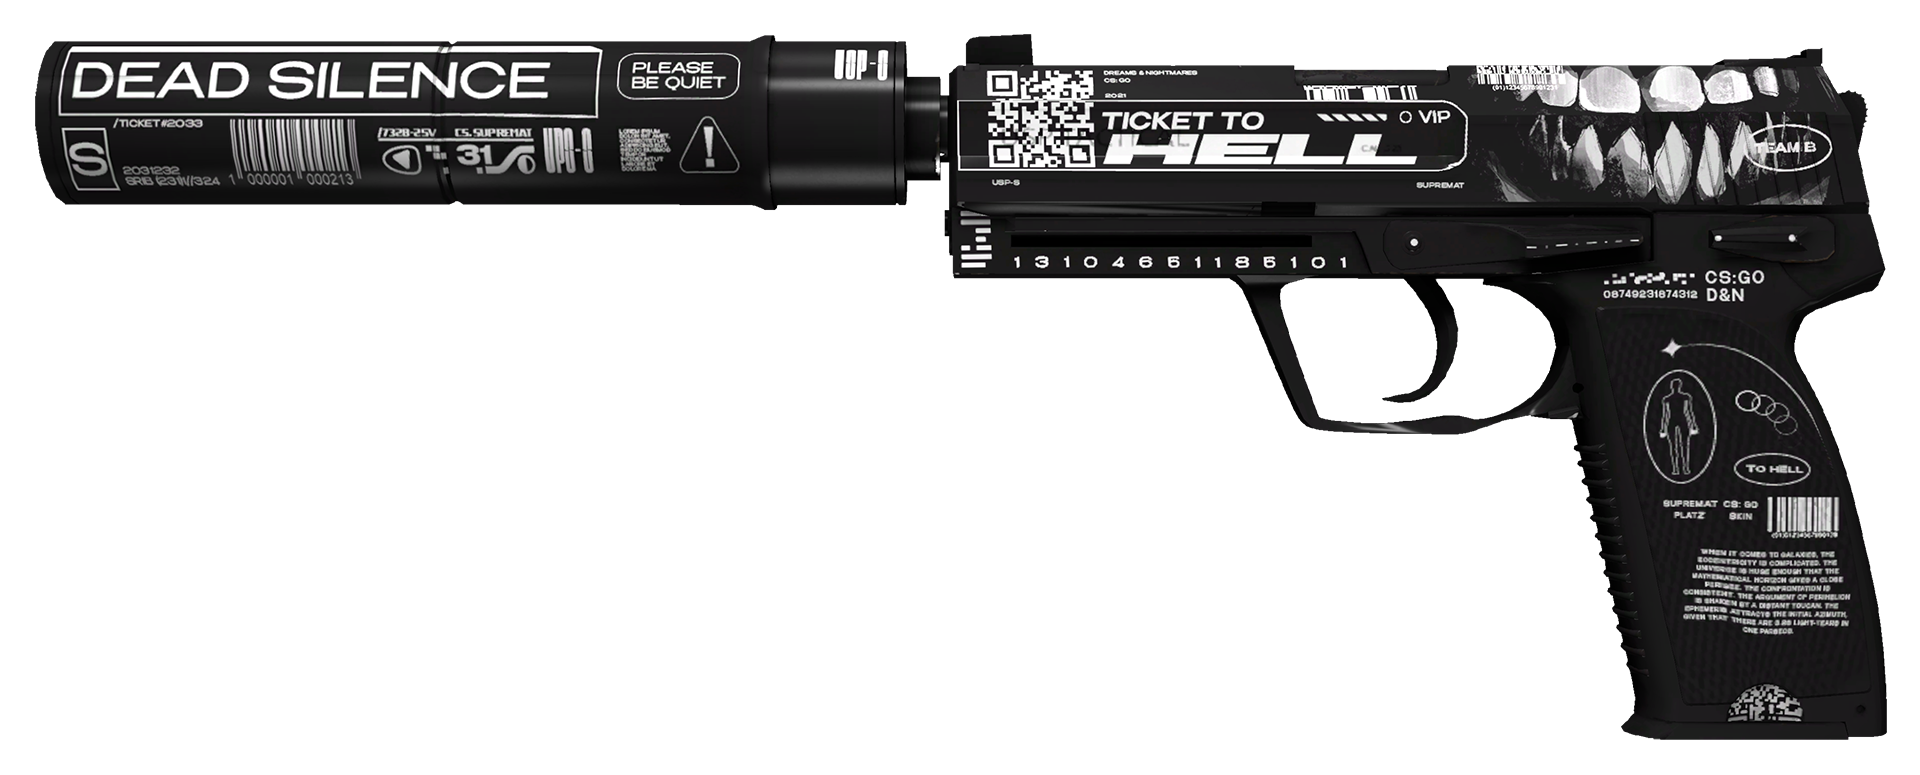 USP-S Ticket to Hell Large Rendering